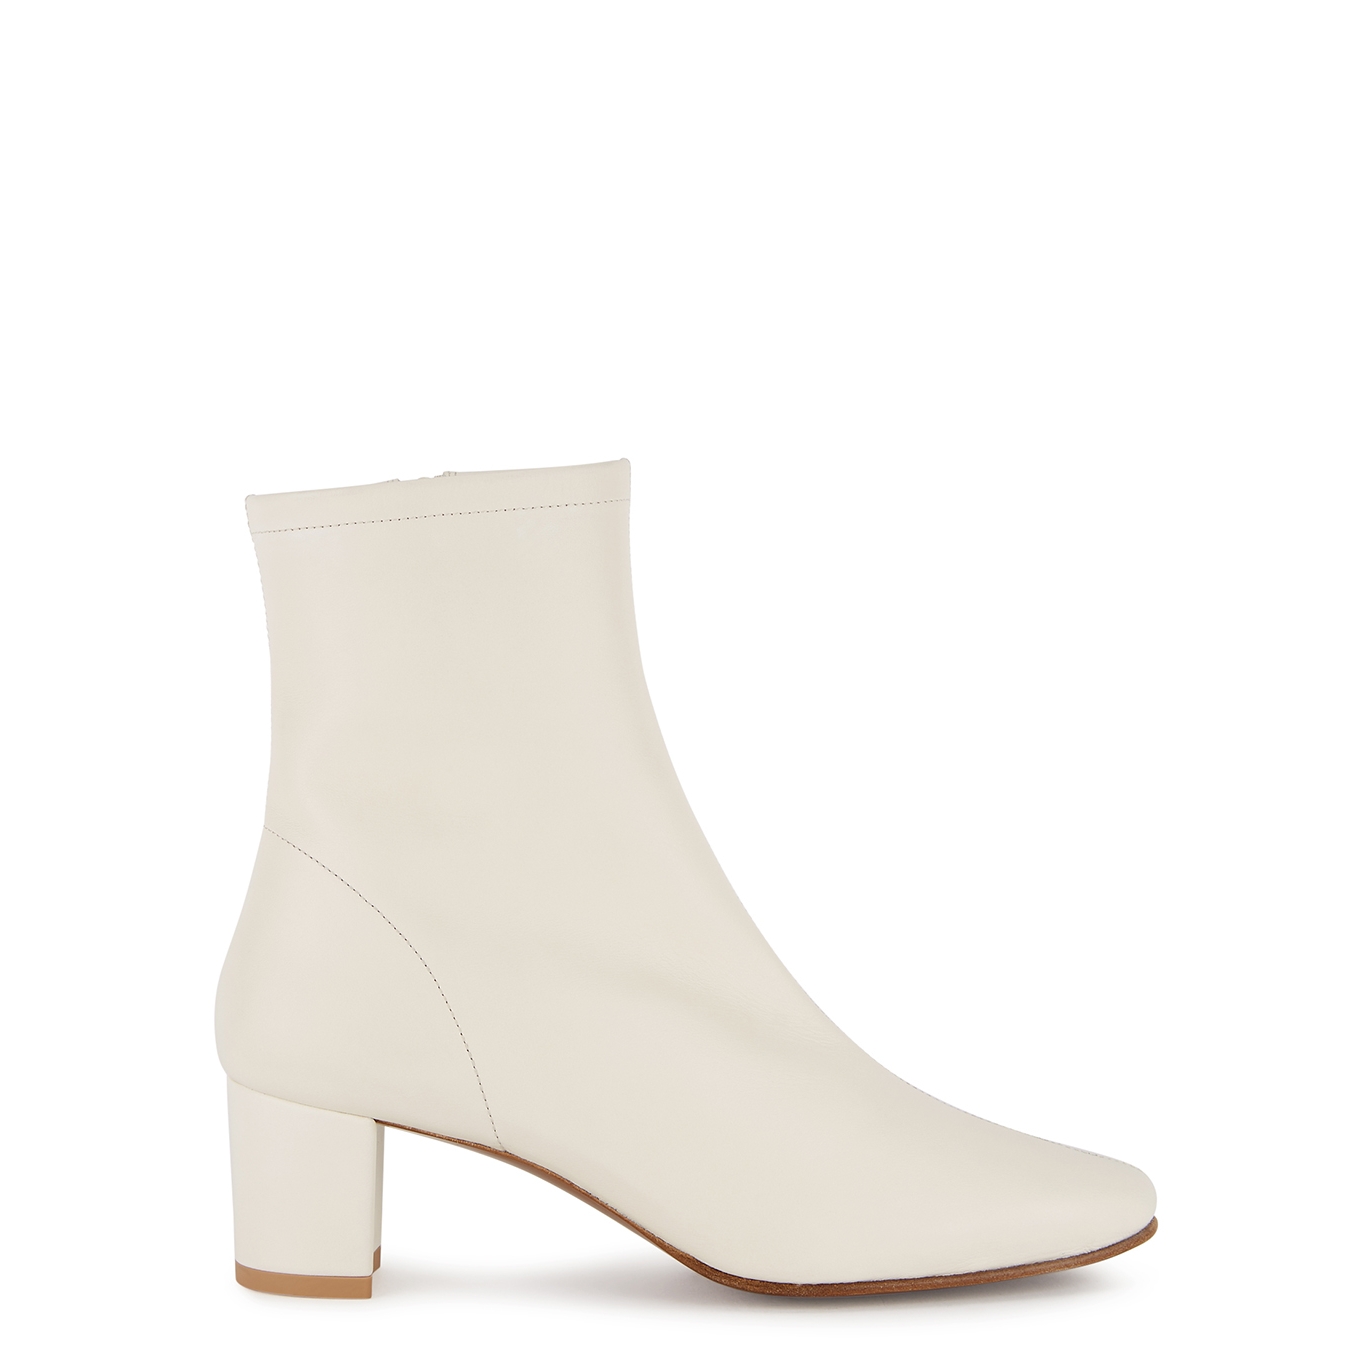 BY FAR Sofia 65 Off-White Leather Ankle Boots